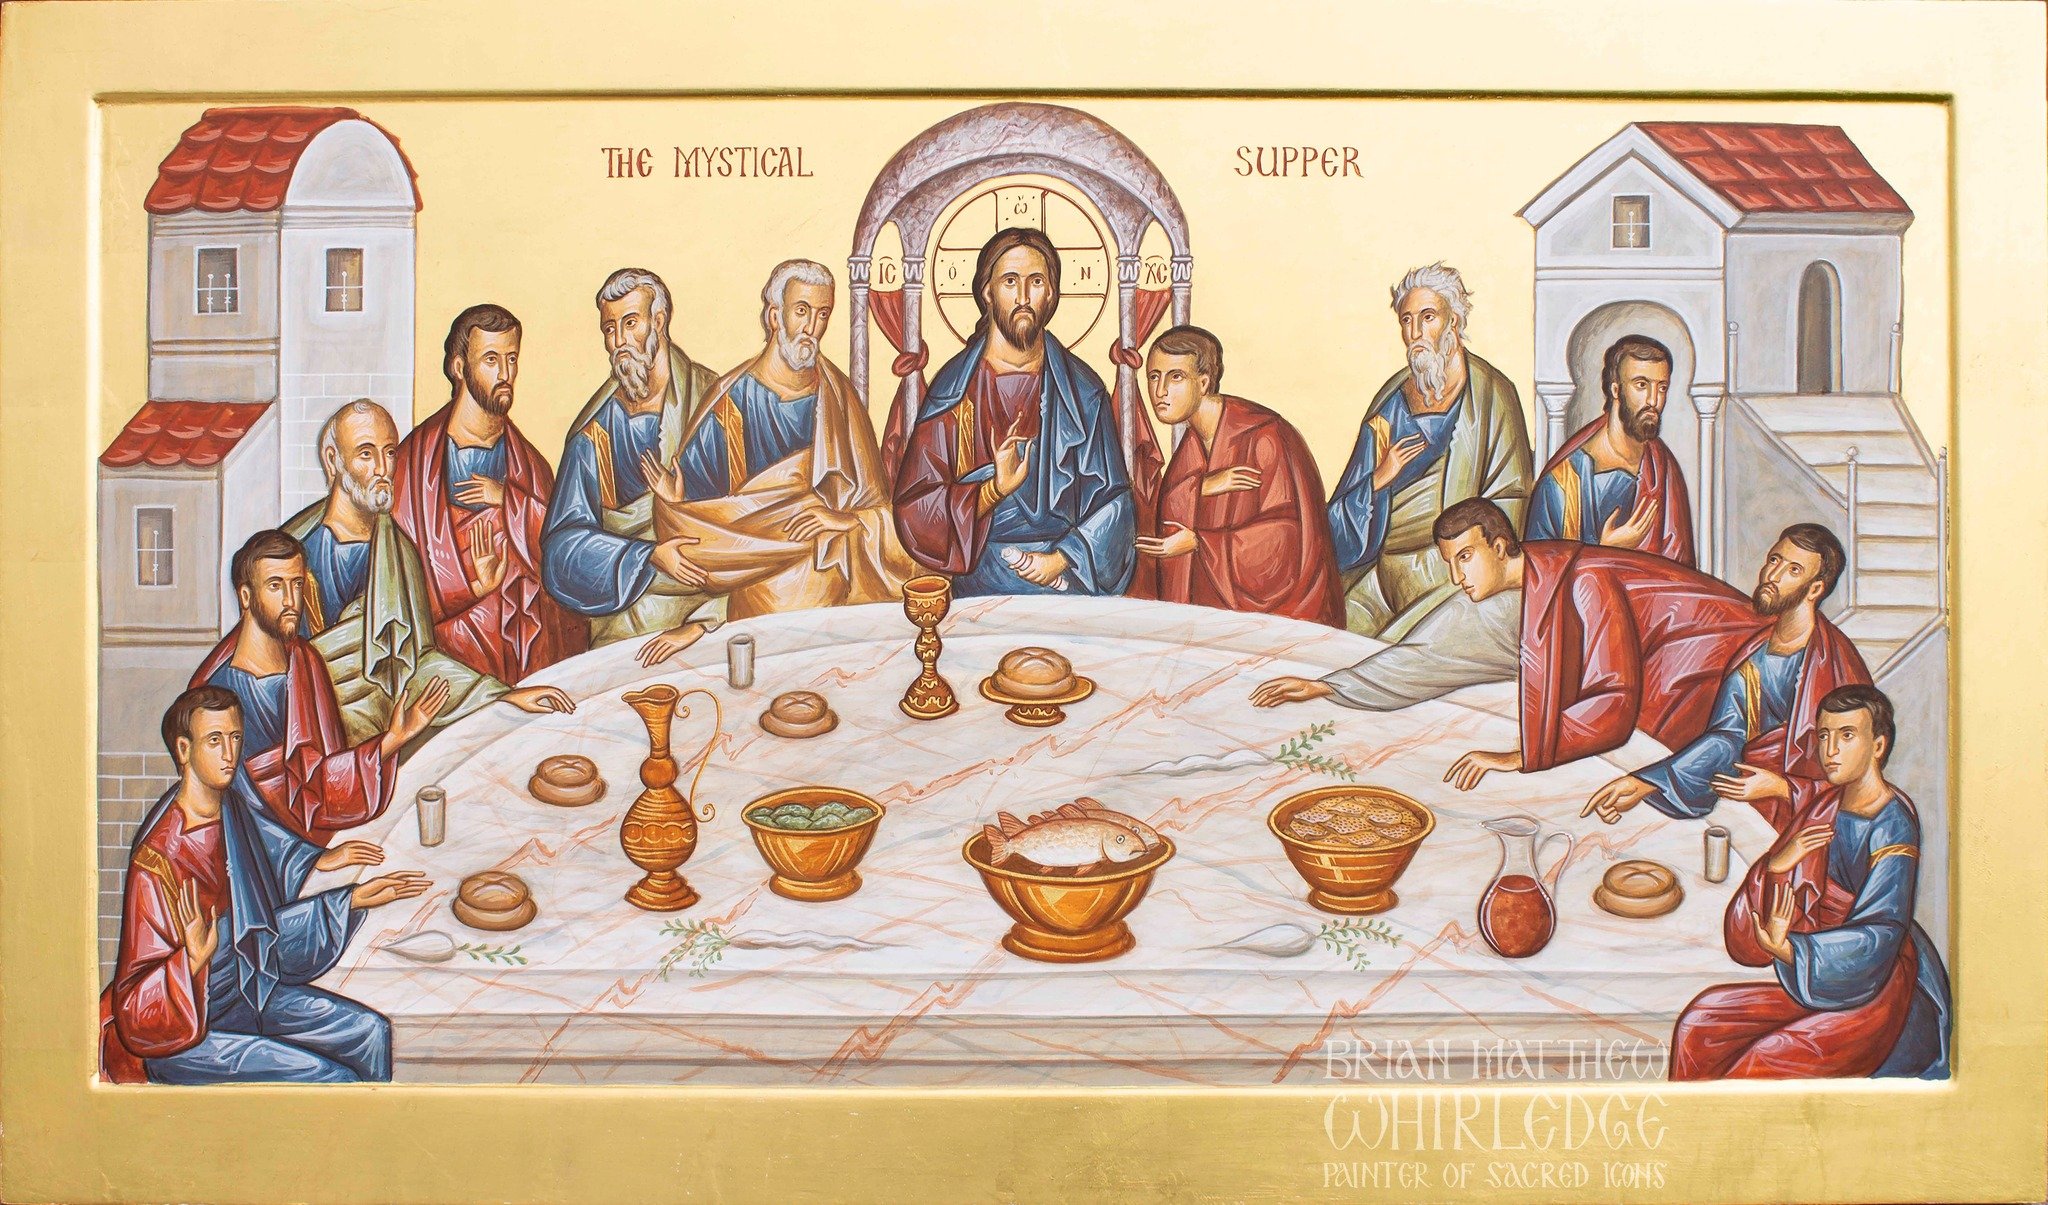 The Mystical Supper. 2021. Egg tempera and gold on panel. From the iconostasis of St. Mary's Orthodox Church, Painted Post, NY.
.
Of Thy Mystical Supper O Son of God, receive me today as a communicant. For I will not give Thee a kiss as did Judas, ne